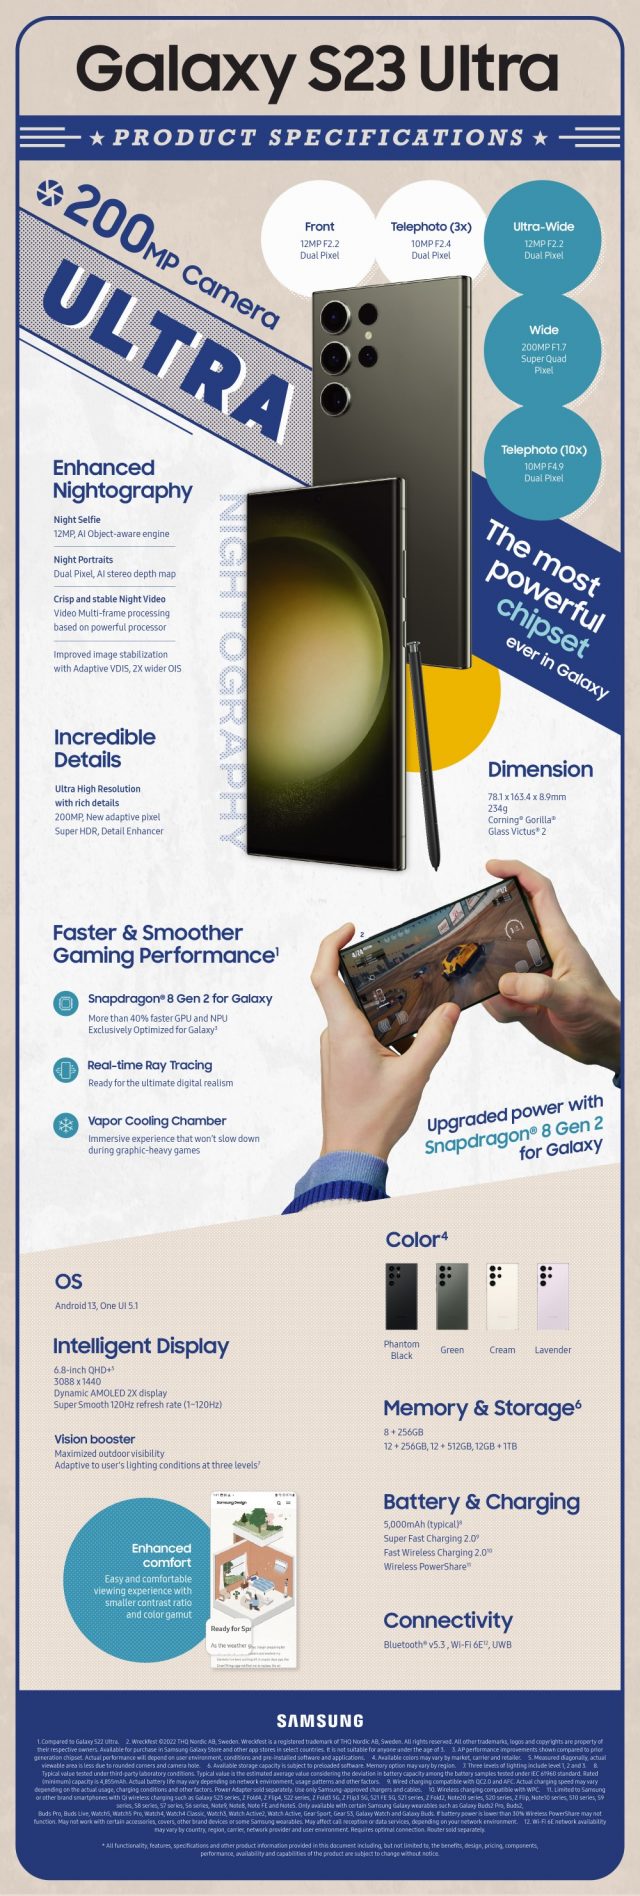 Galaxy S23 Ultra Product Specifications Infographic